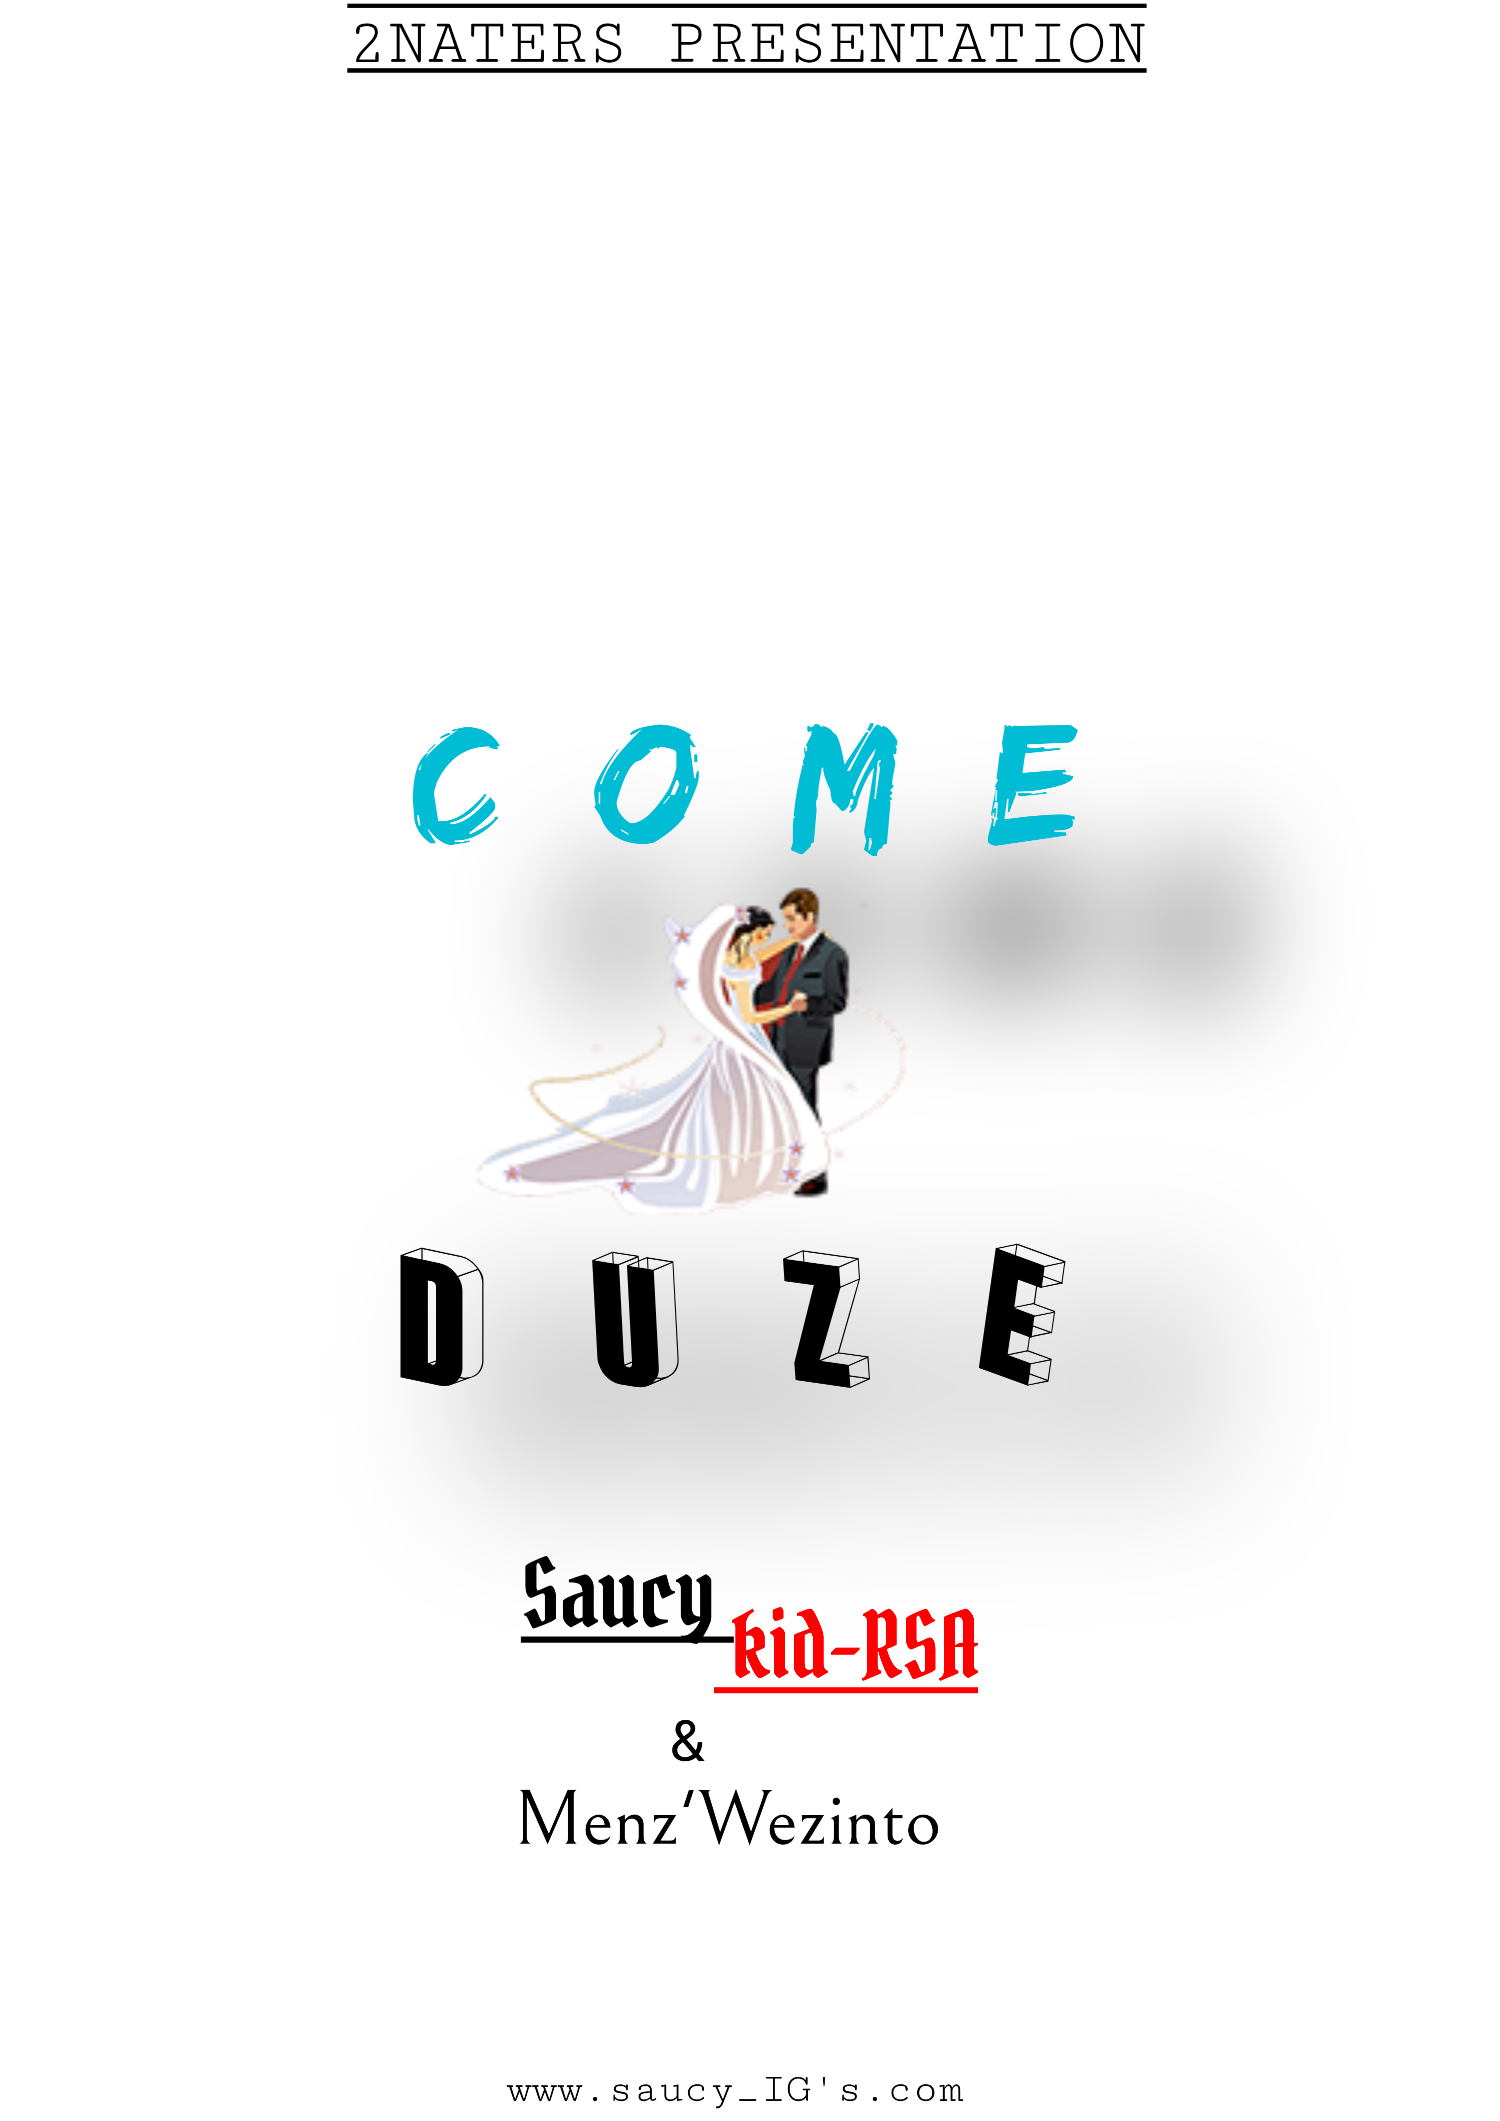 Come duze - Saucy kid and Menziwezinto